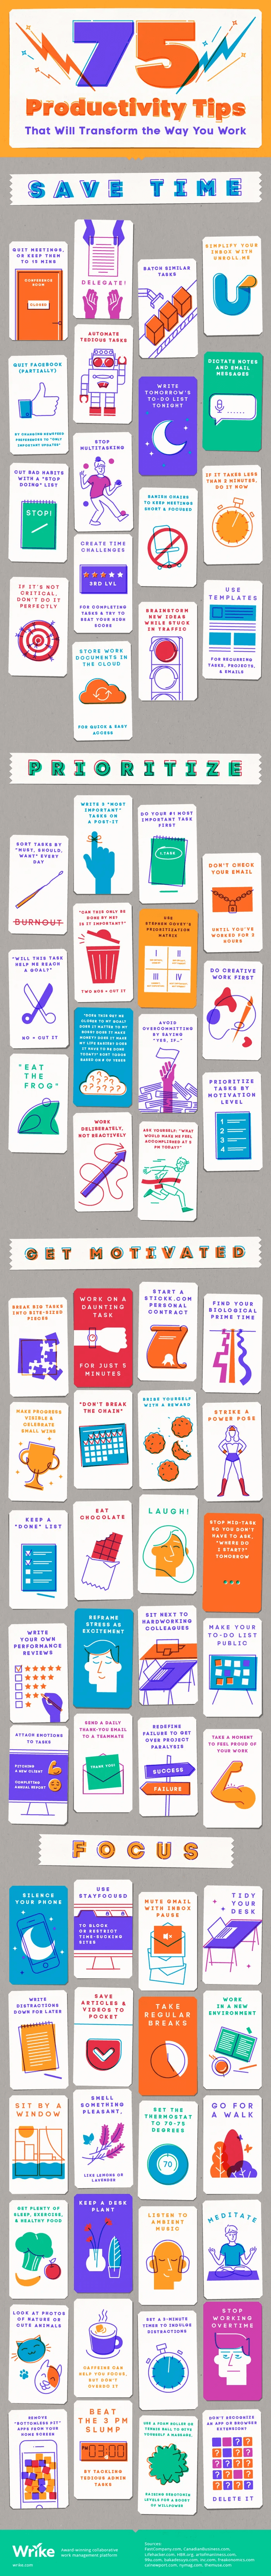 75 Productivity Tips That Will Transform The Way You Work - Infographic